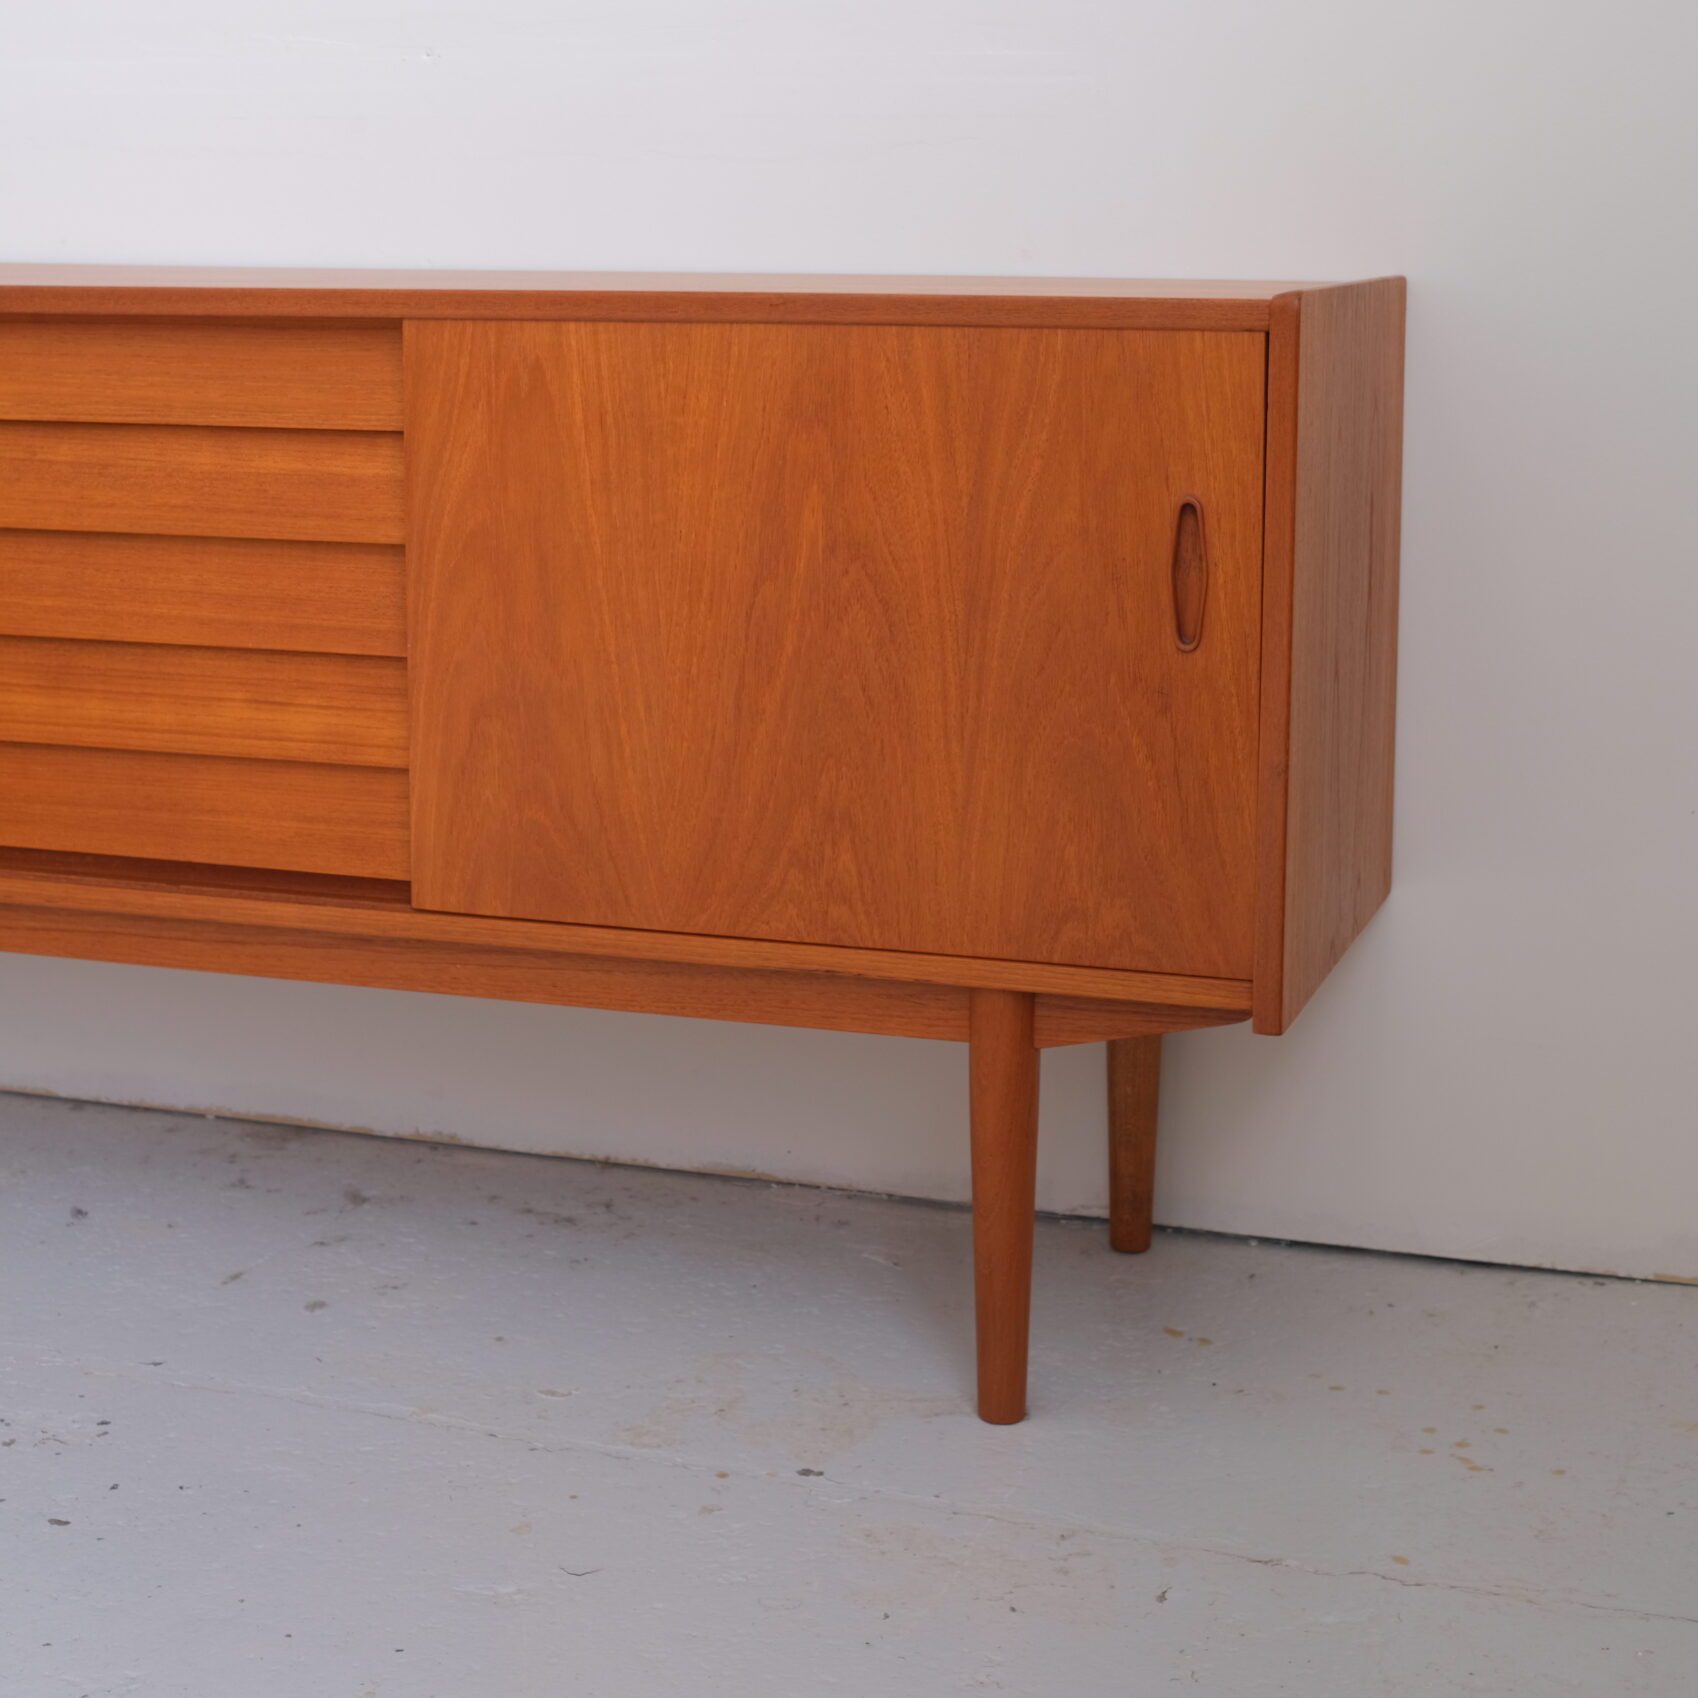 Nils Jonsson Trio sideboard (reserved)